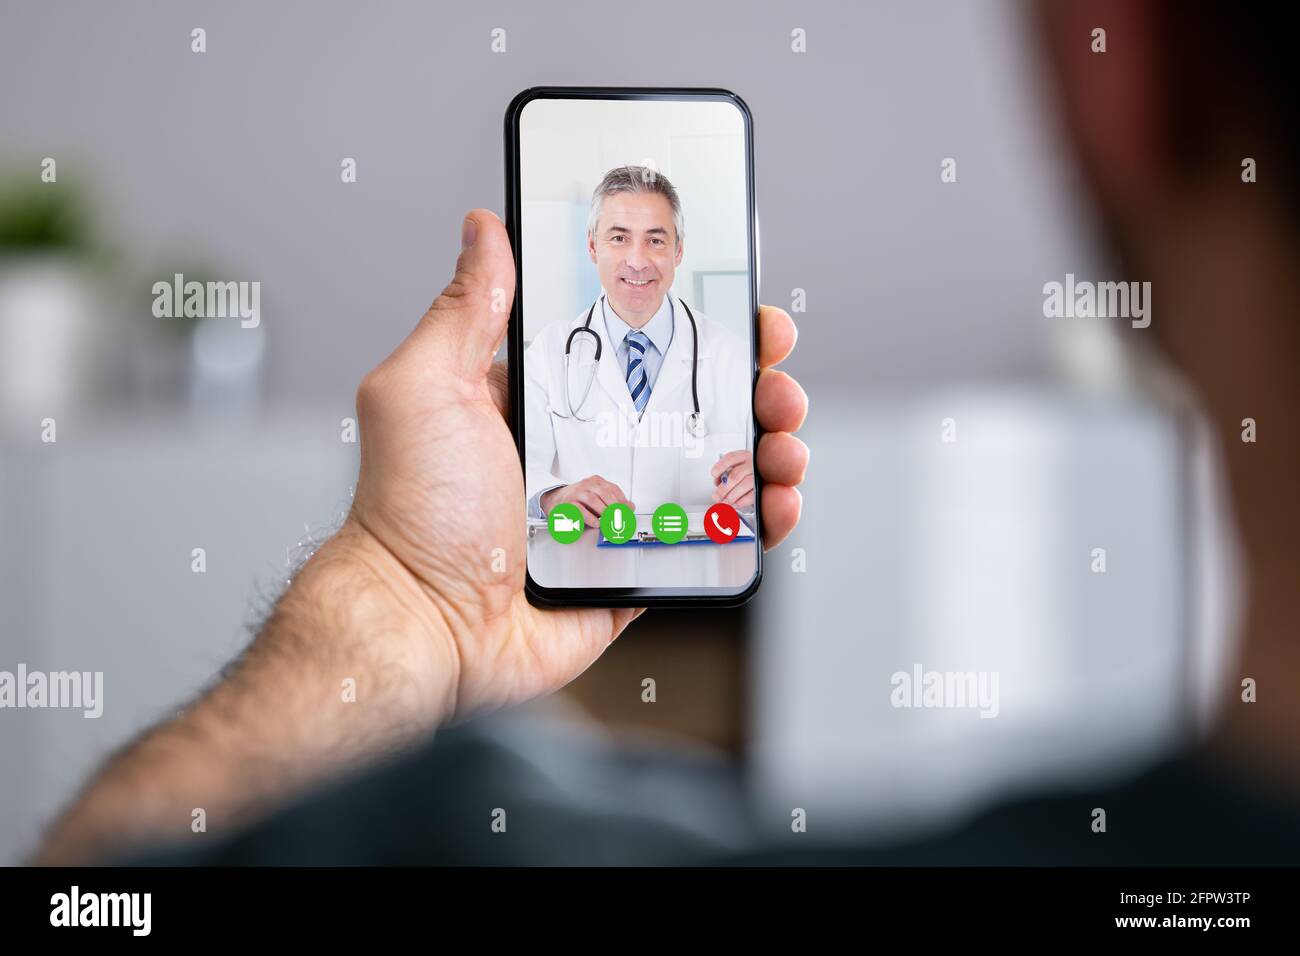 Man Having Video Chat With Doctor On Phone At Home Stock Photo